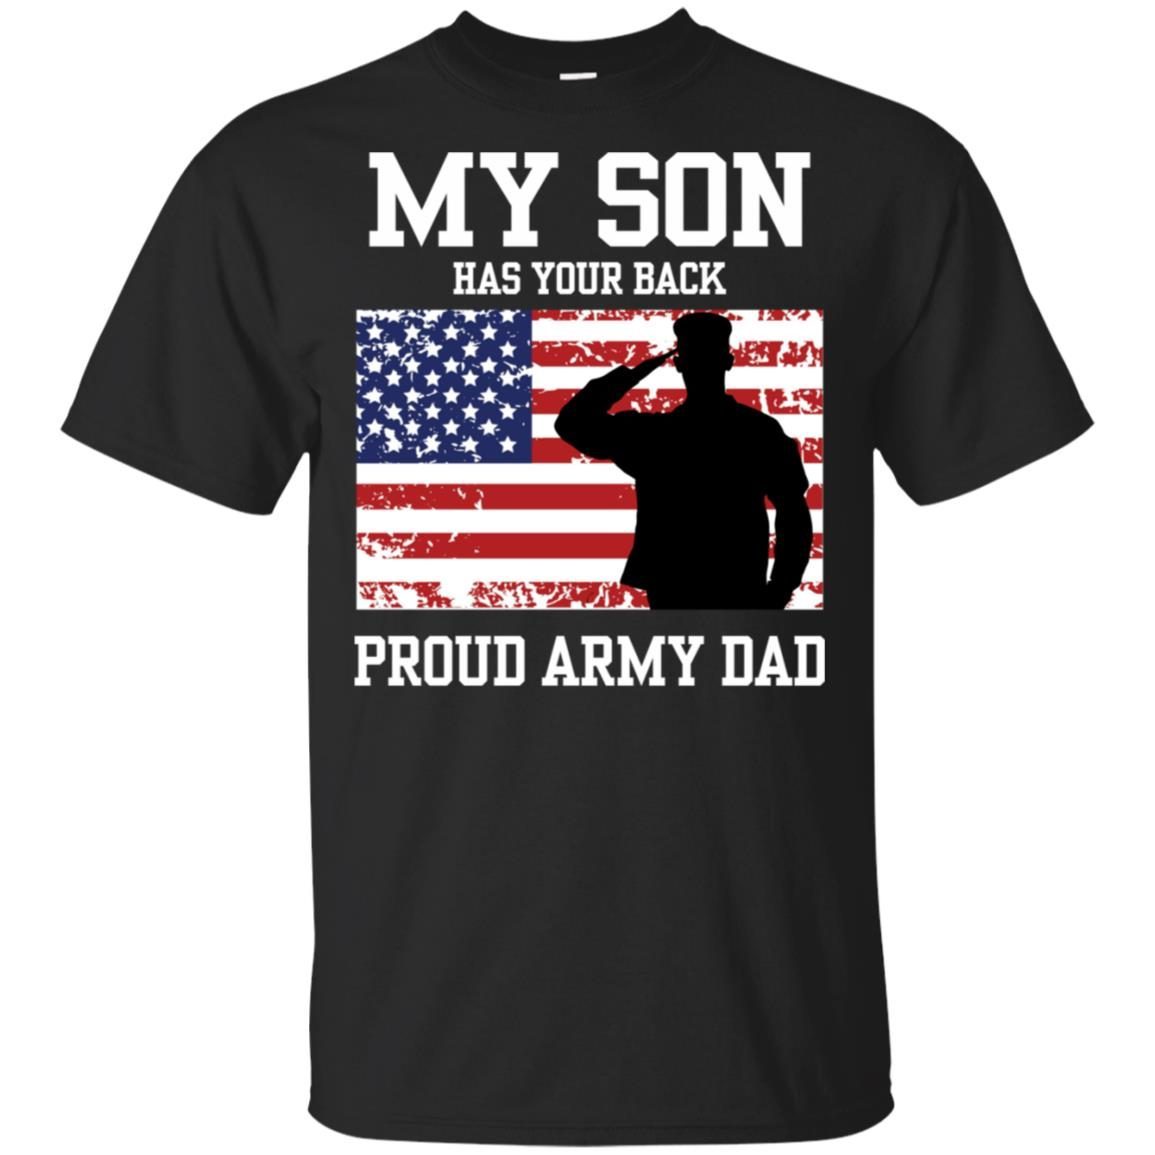 My Son Has Your Back Proud Army Dad shirt 1